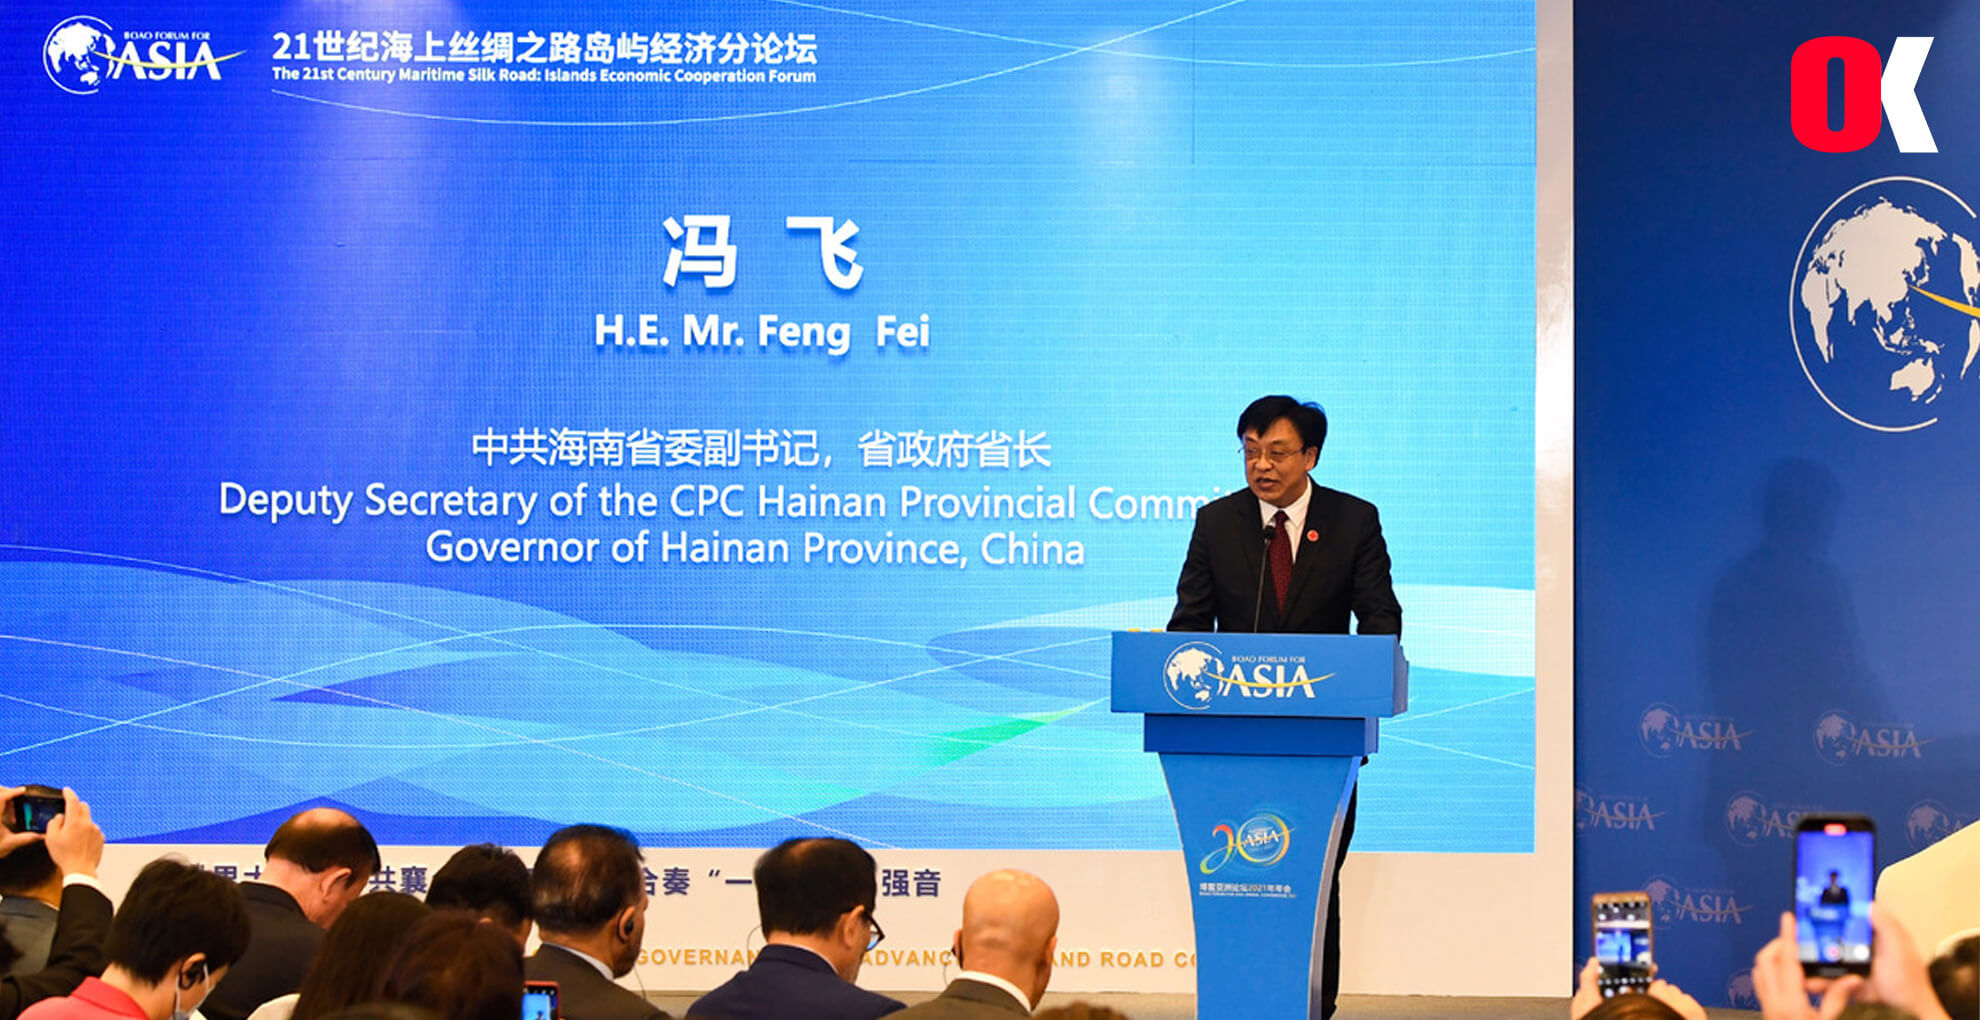 Free trade port promotes relations between Hainan and ASEAN